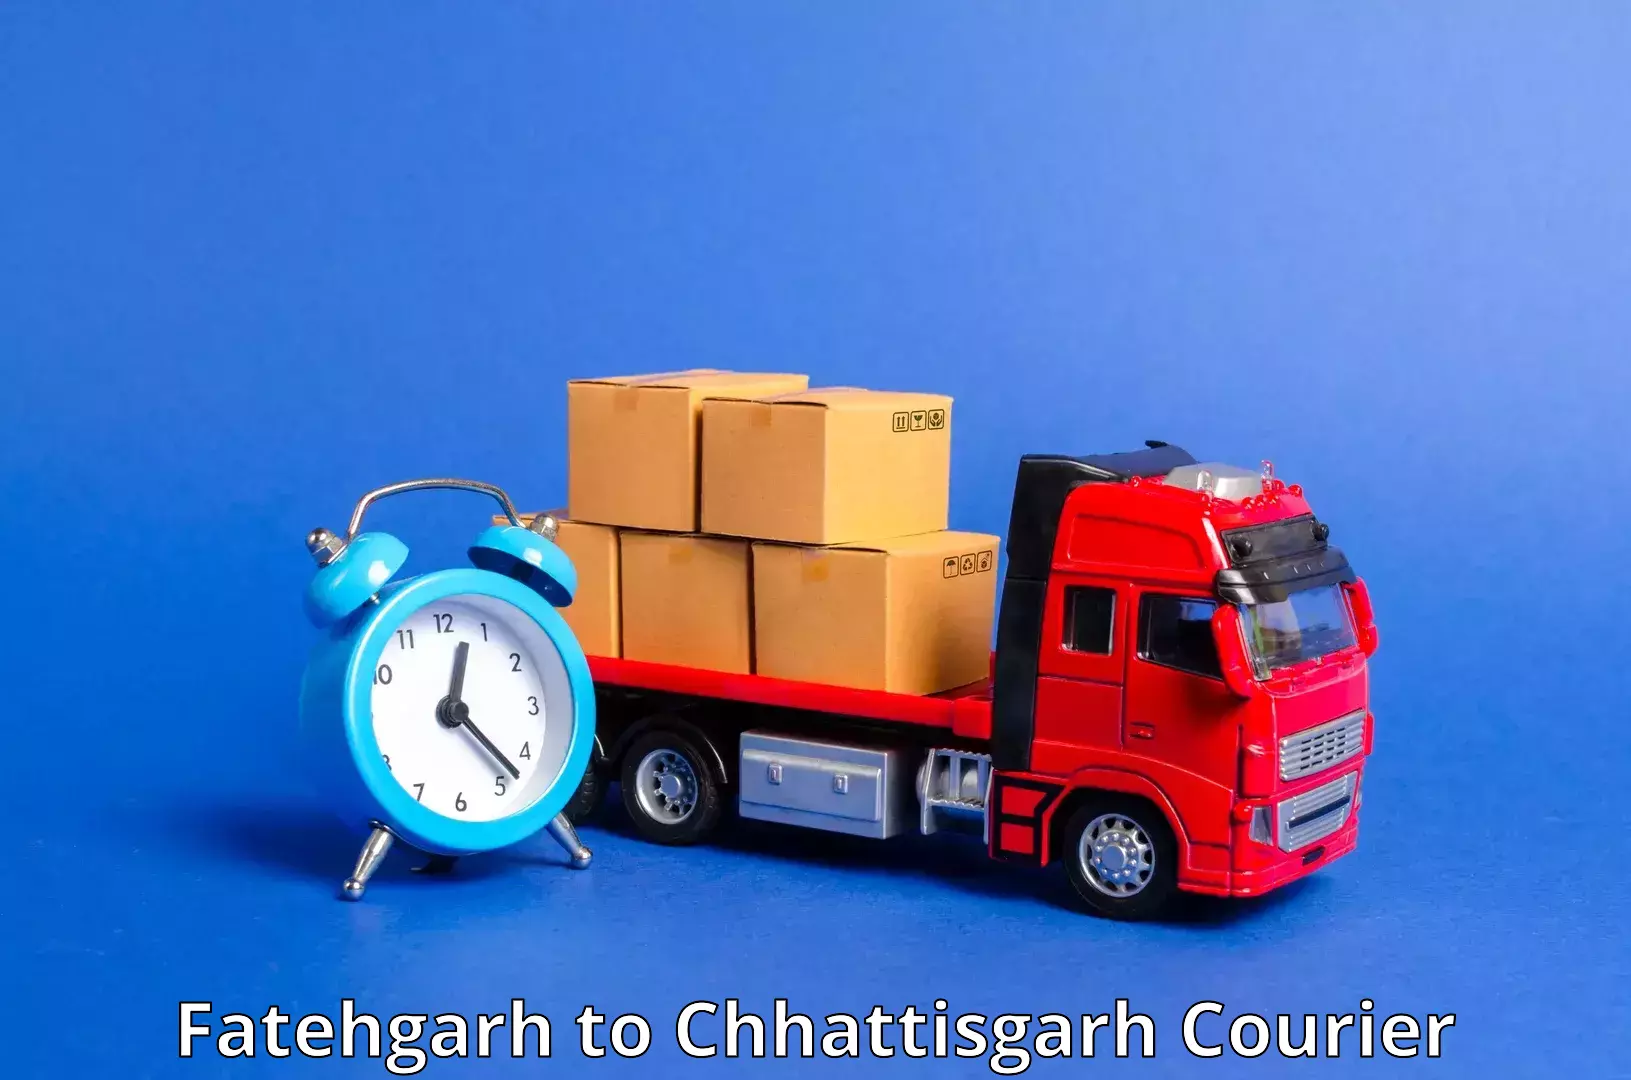 Next-day delivery options Fatehgarh to Dantewada